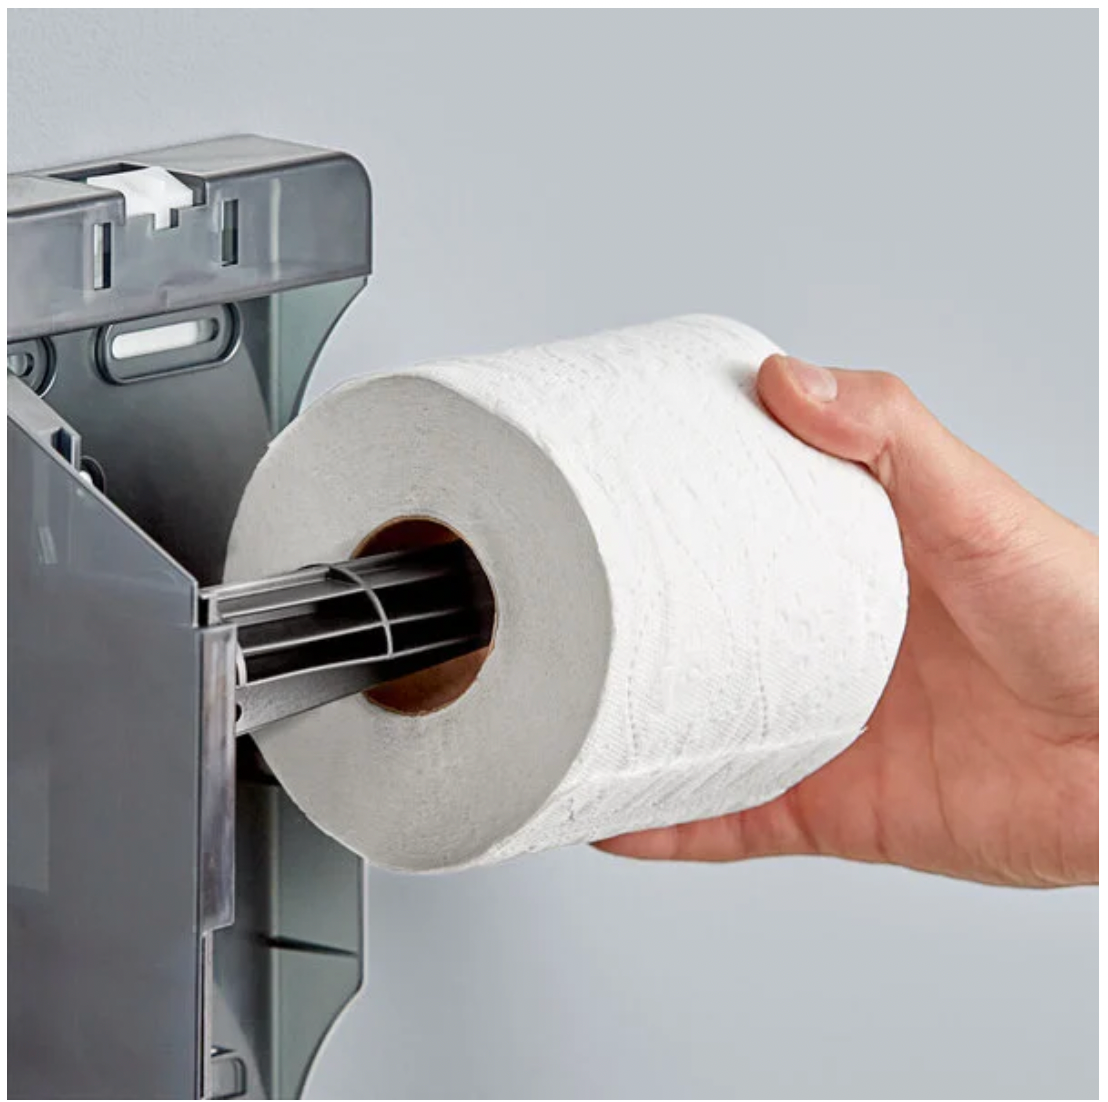 Lavex Select Little Big Roll 420' 2-Ply Toilet Tissue Roll with 5